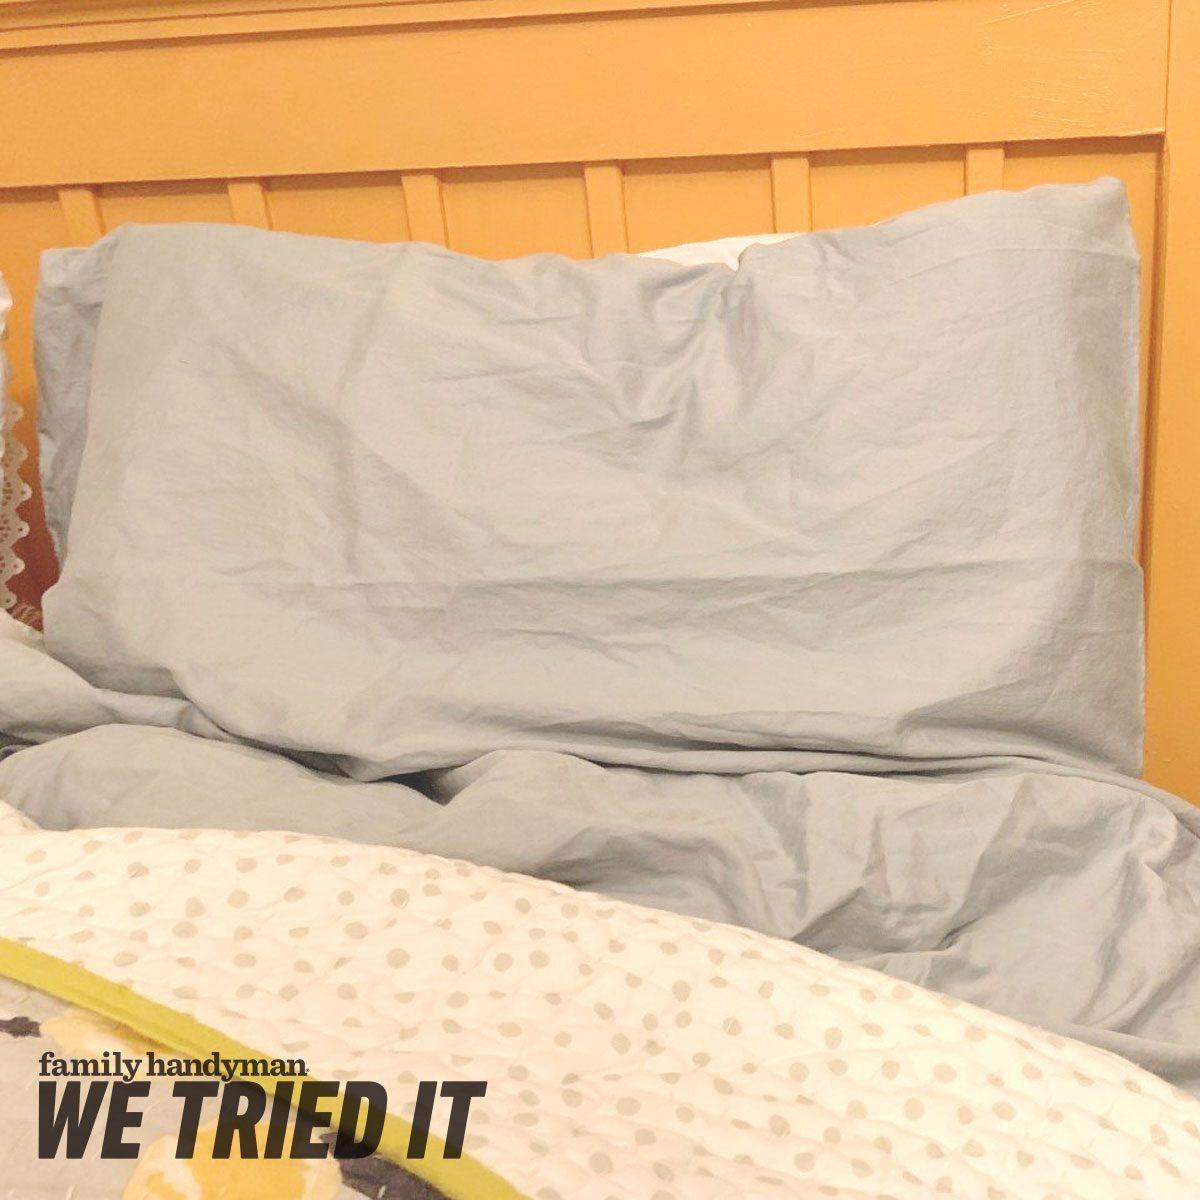 https://www.familyhandyman.com/wp-content/uploads/2023/04/FH-We-Tried-It-boll-and-branch-sheets.jpg?fit=700%2C1024